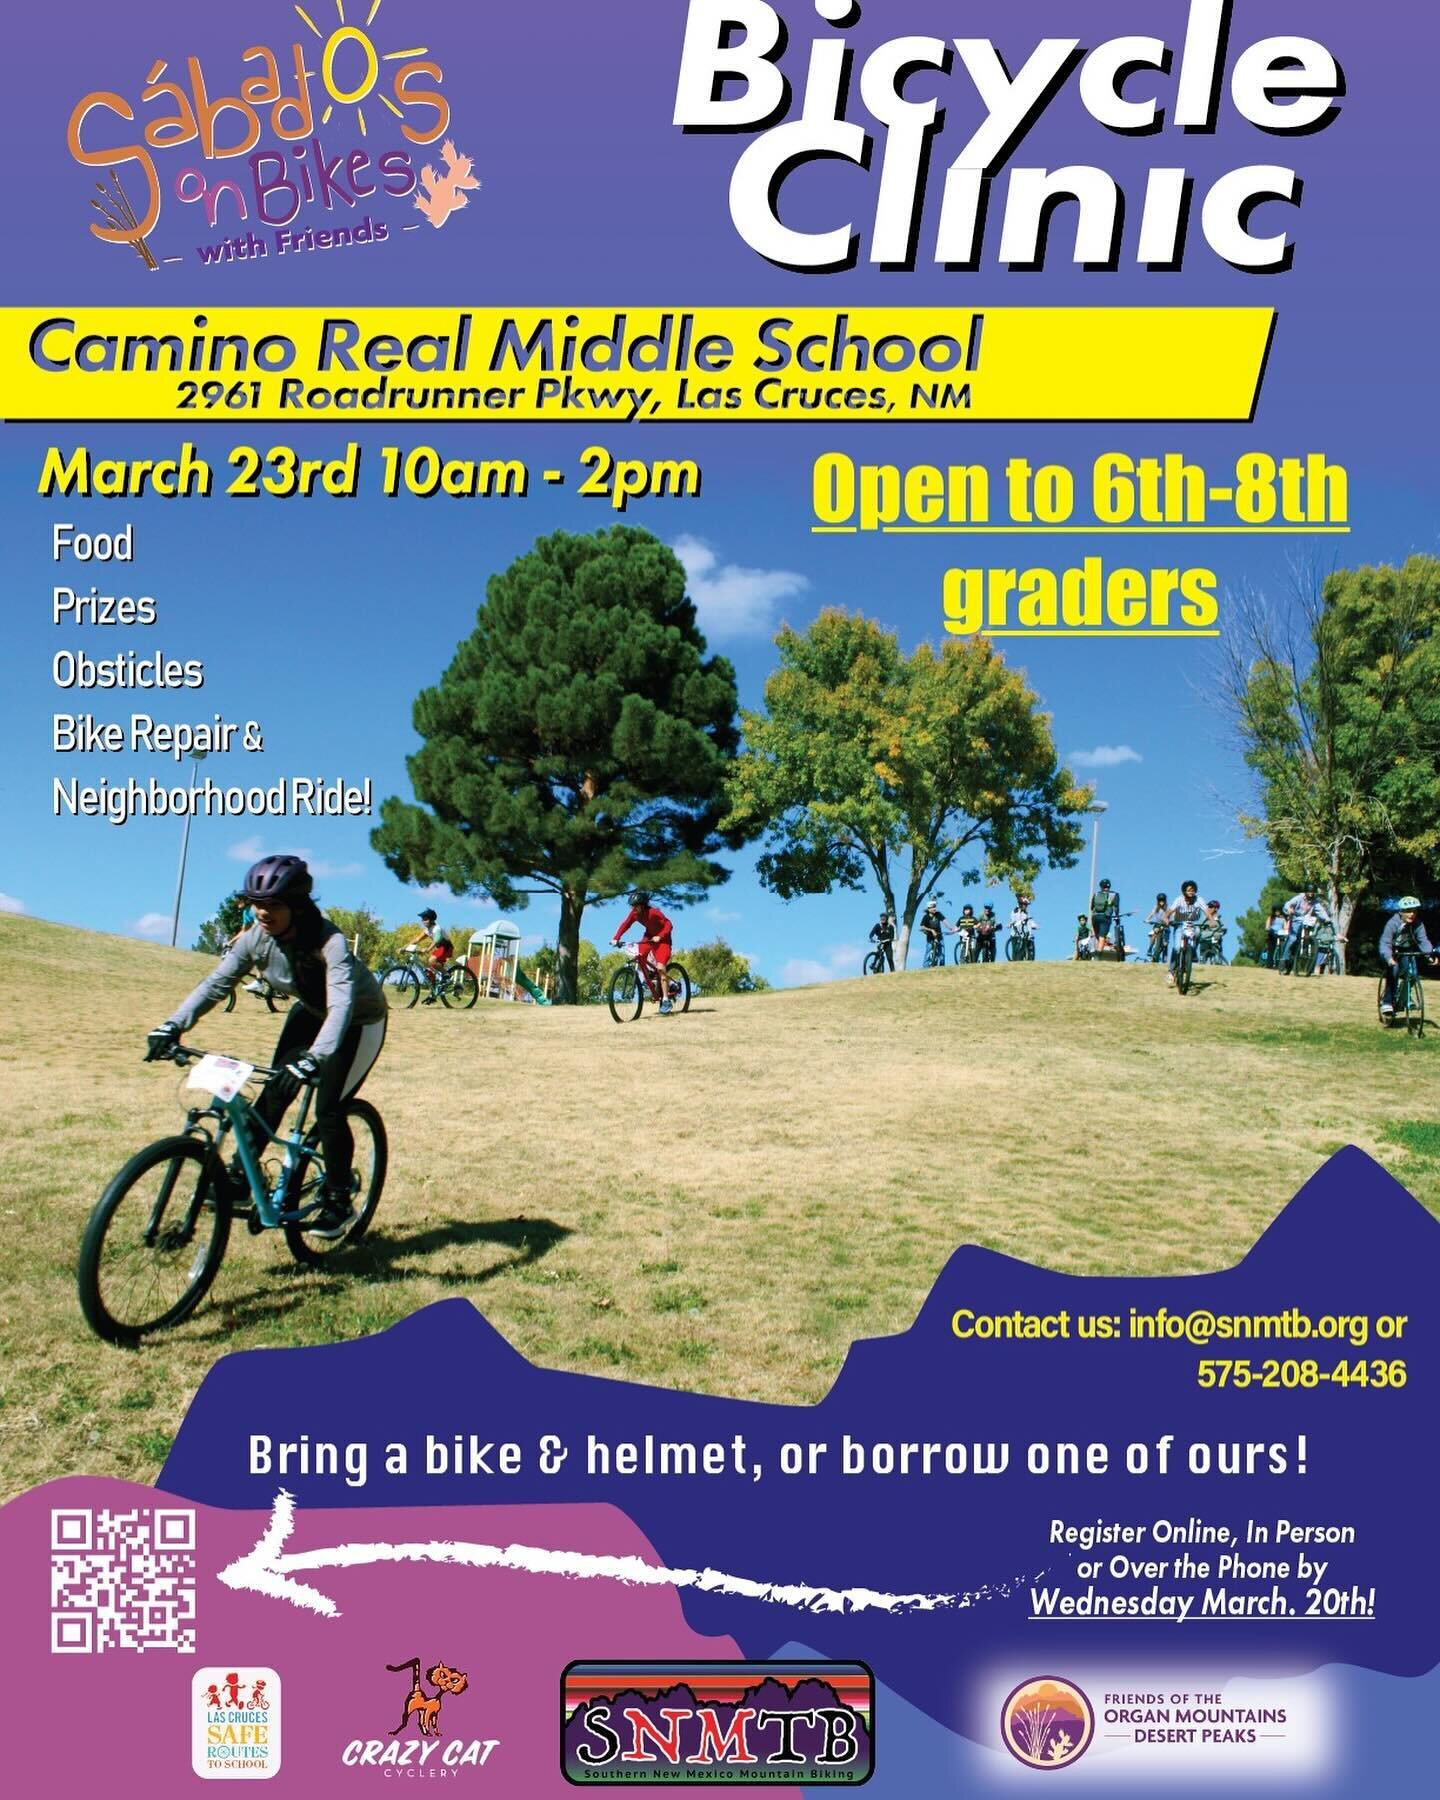 Join us for our last S&aacute;bados on Bikes with Friends of the season on March 23rd!! Open to all 6th - 8th graders, this event will be held at Camino Real Middle School. Obstacles, bike repair, rides, food, prizes and all for FREE!!!! Register onl